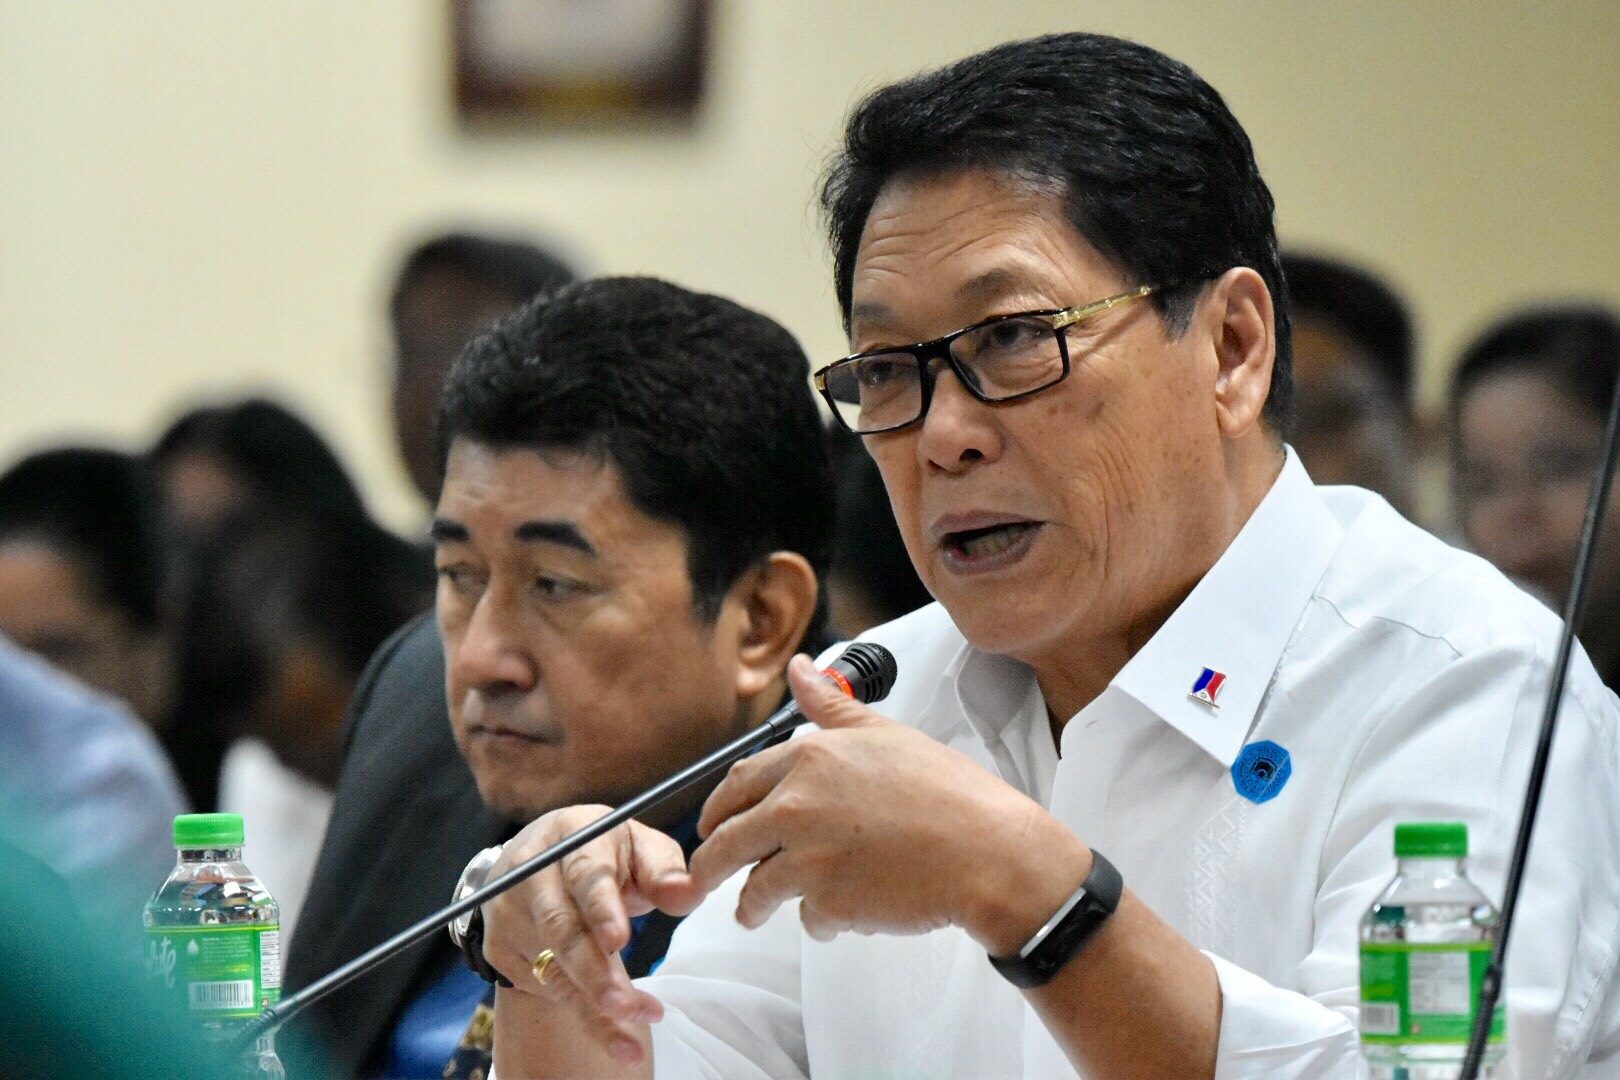 Filipino household workers can fly to Kuwait next week – Bello